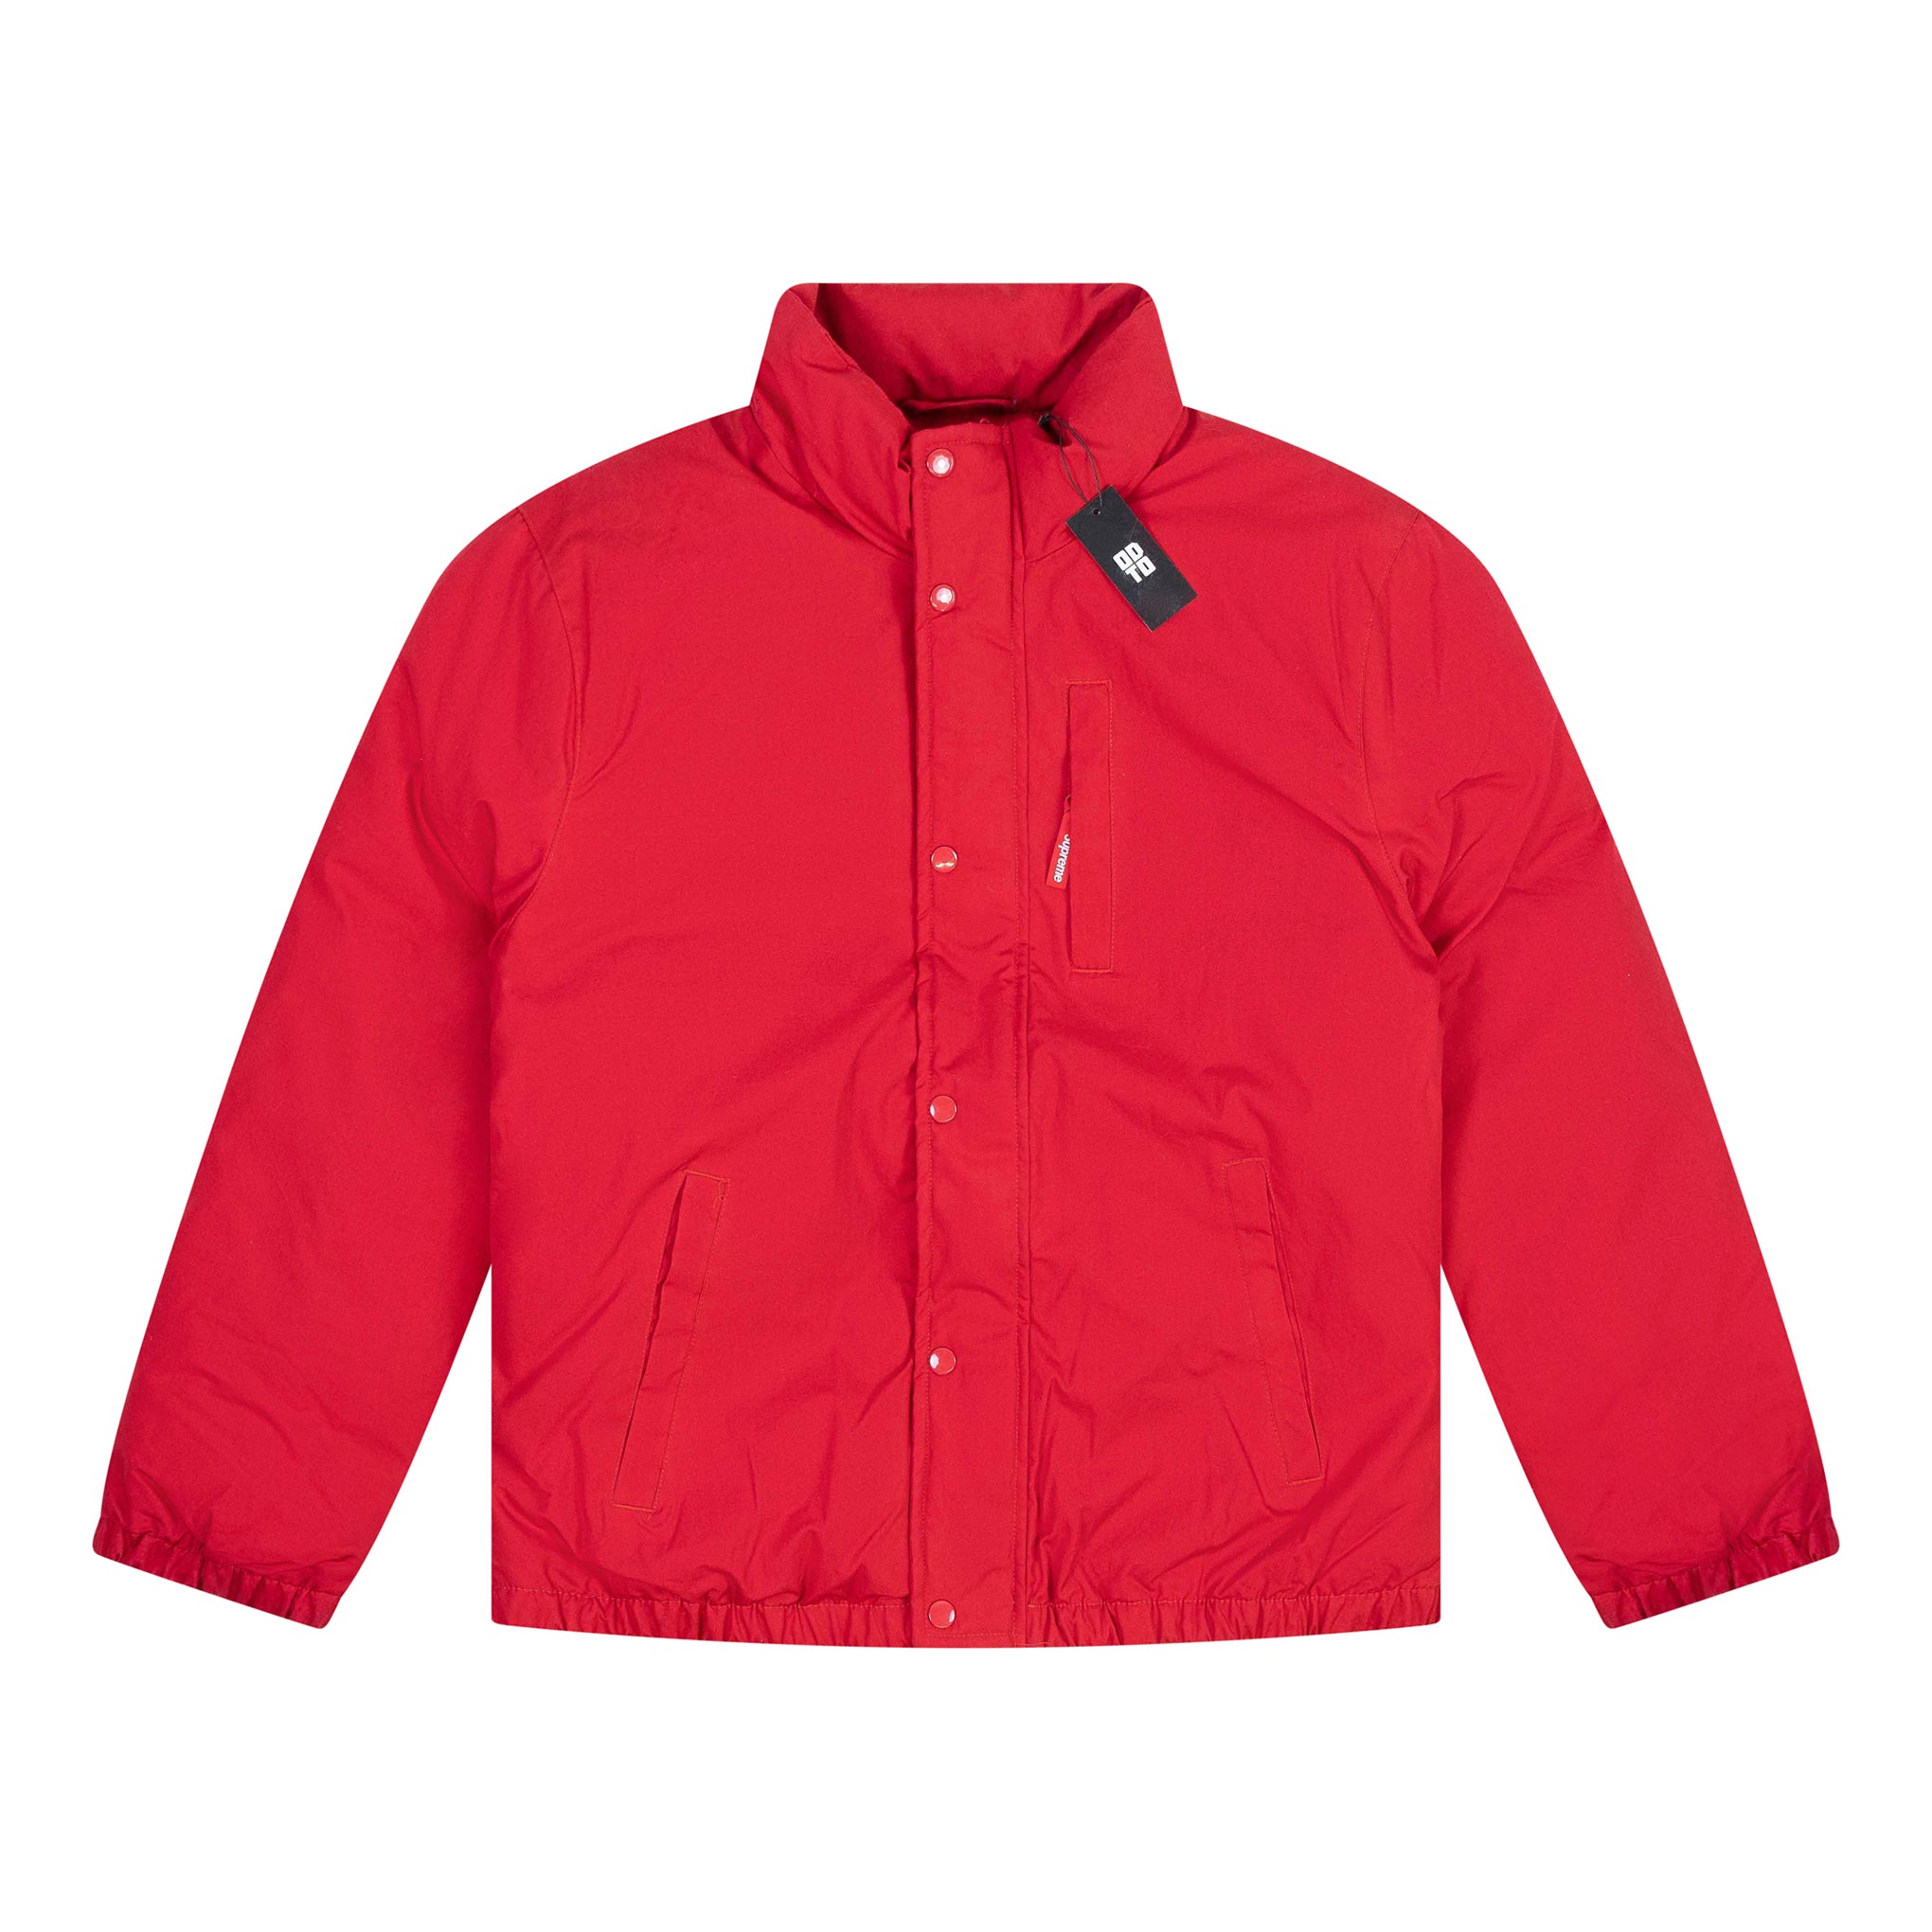 SUPREME ASTRONAUT PUFFY JACKET RED – ODTO